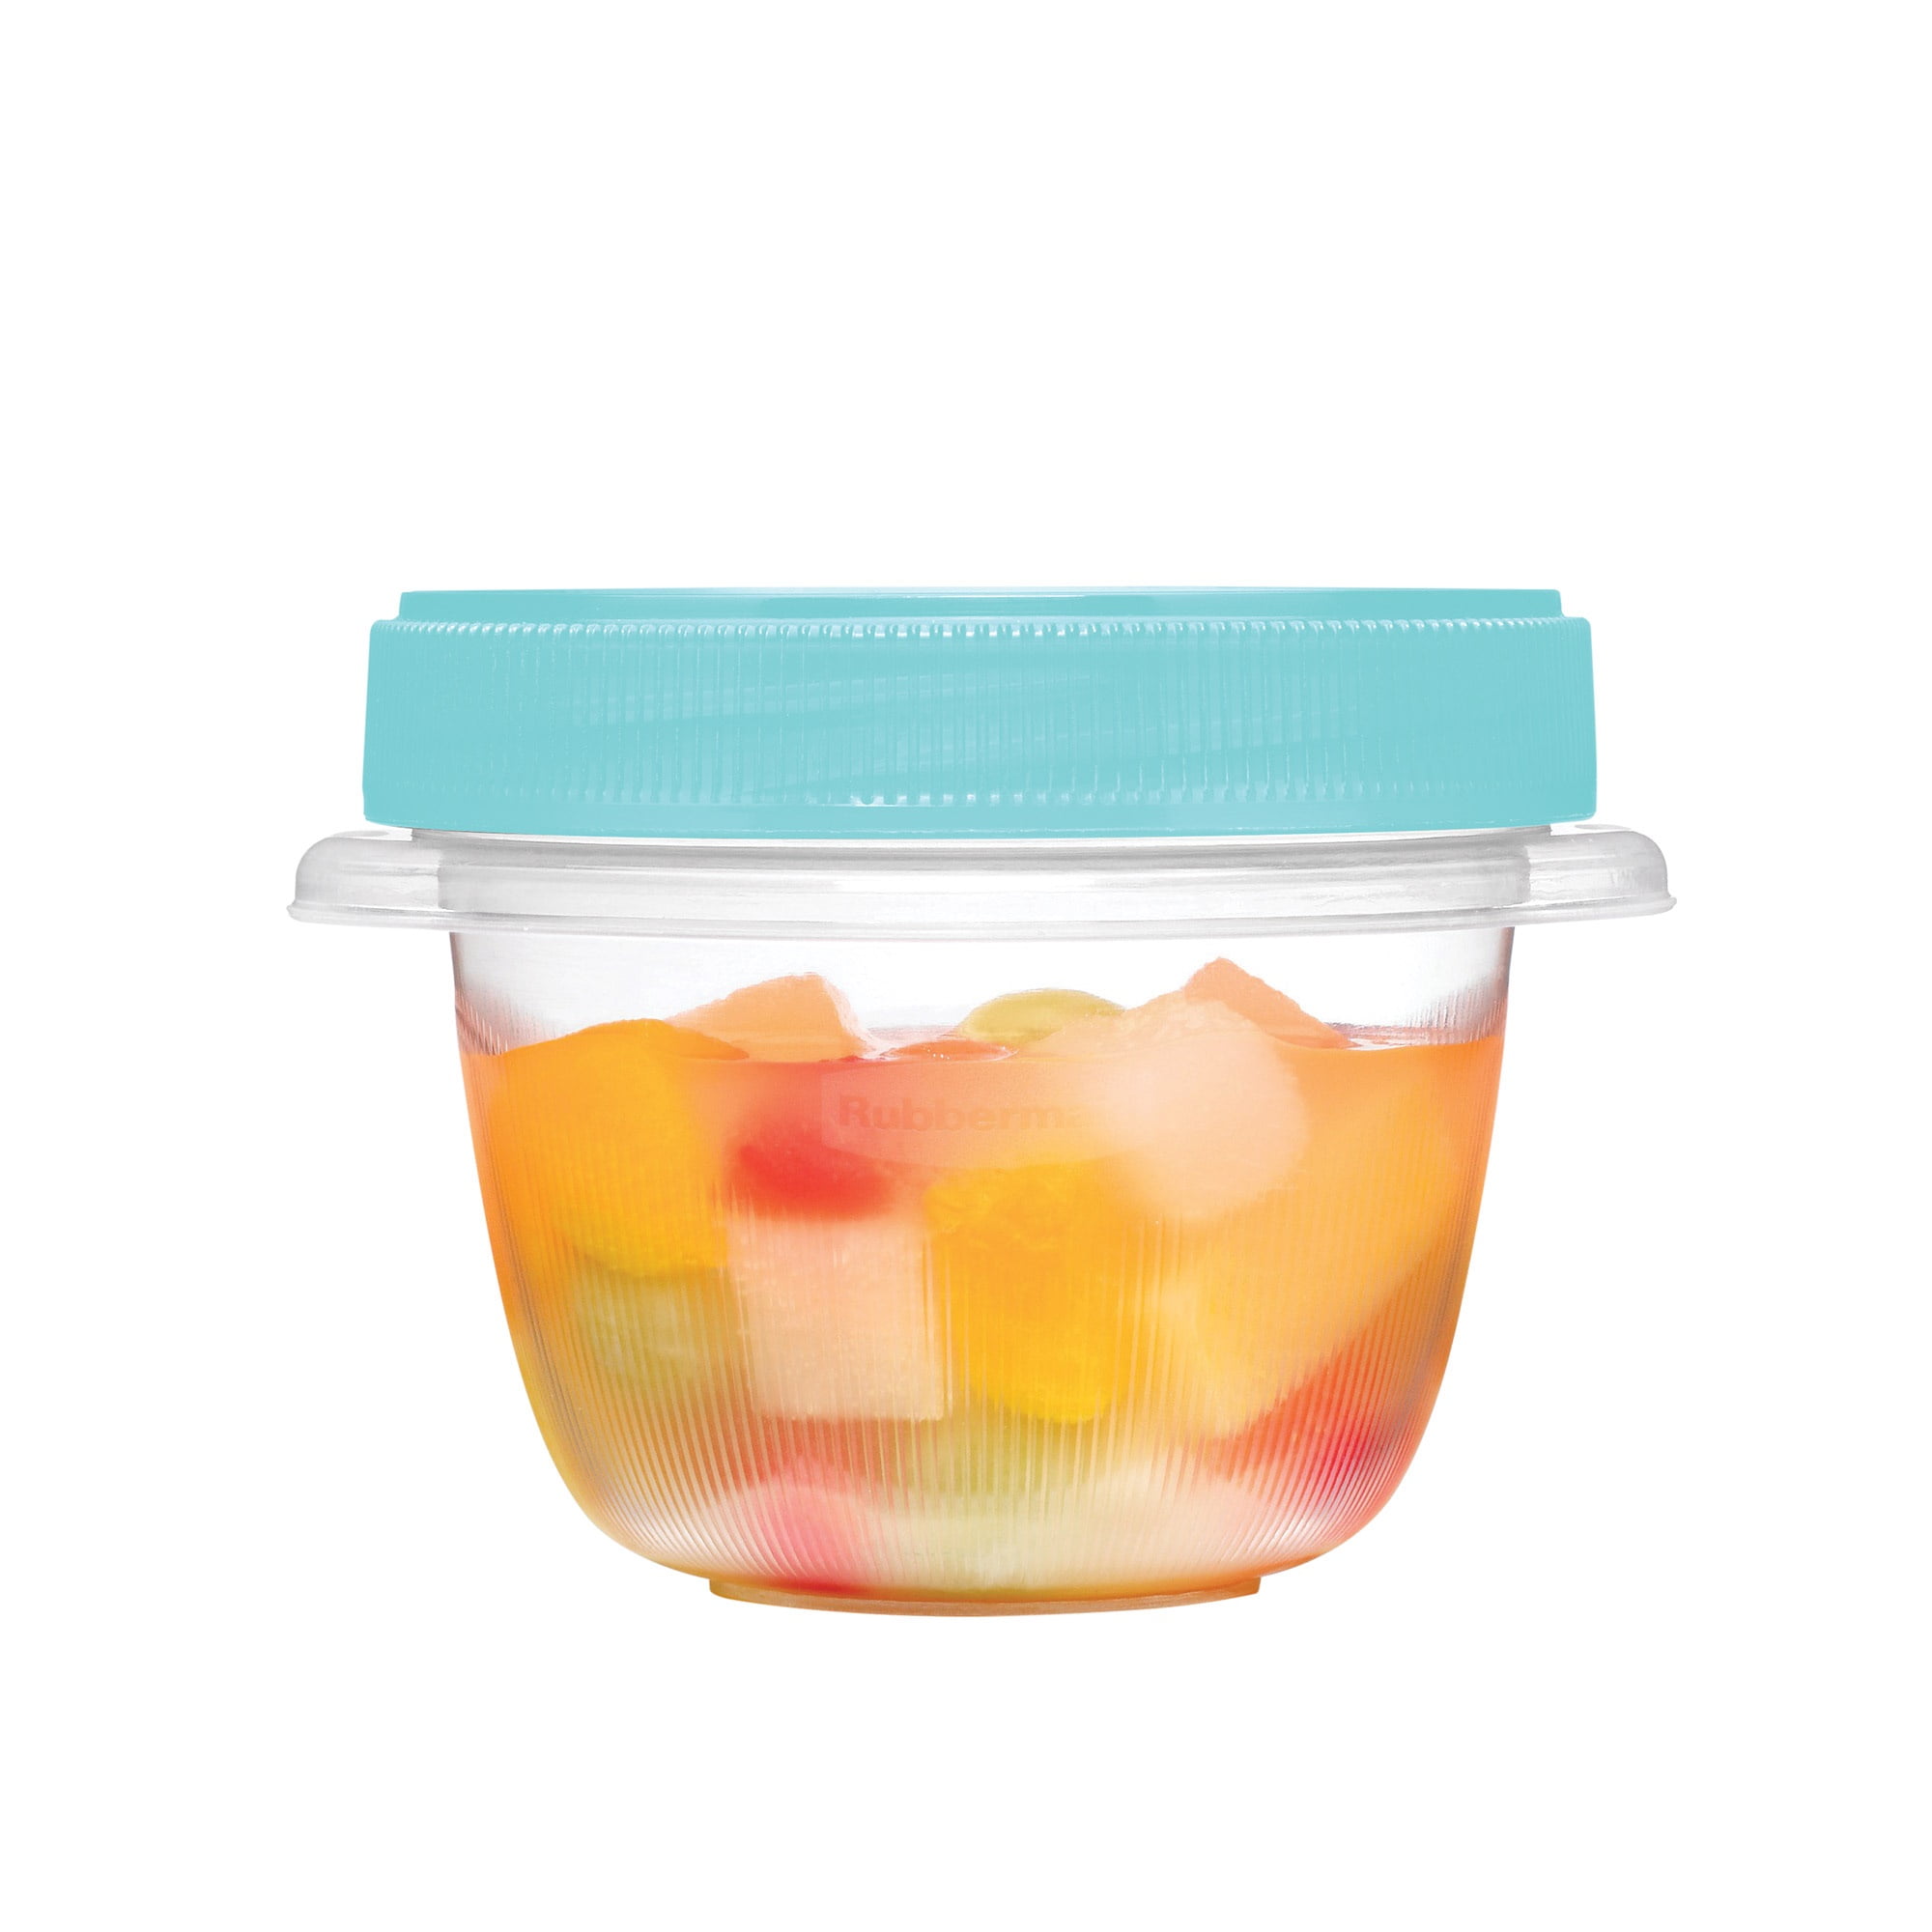 Rubbermaid 2.5 Gallon Large Food Storage Container 2049363 – Good's Store  Online